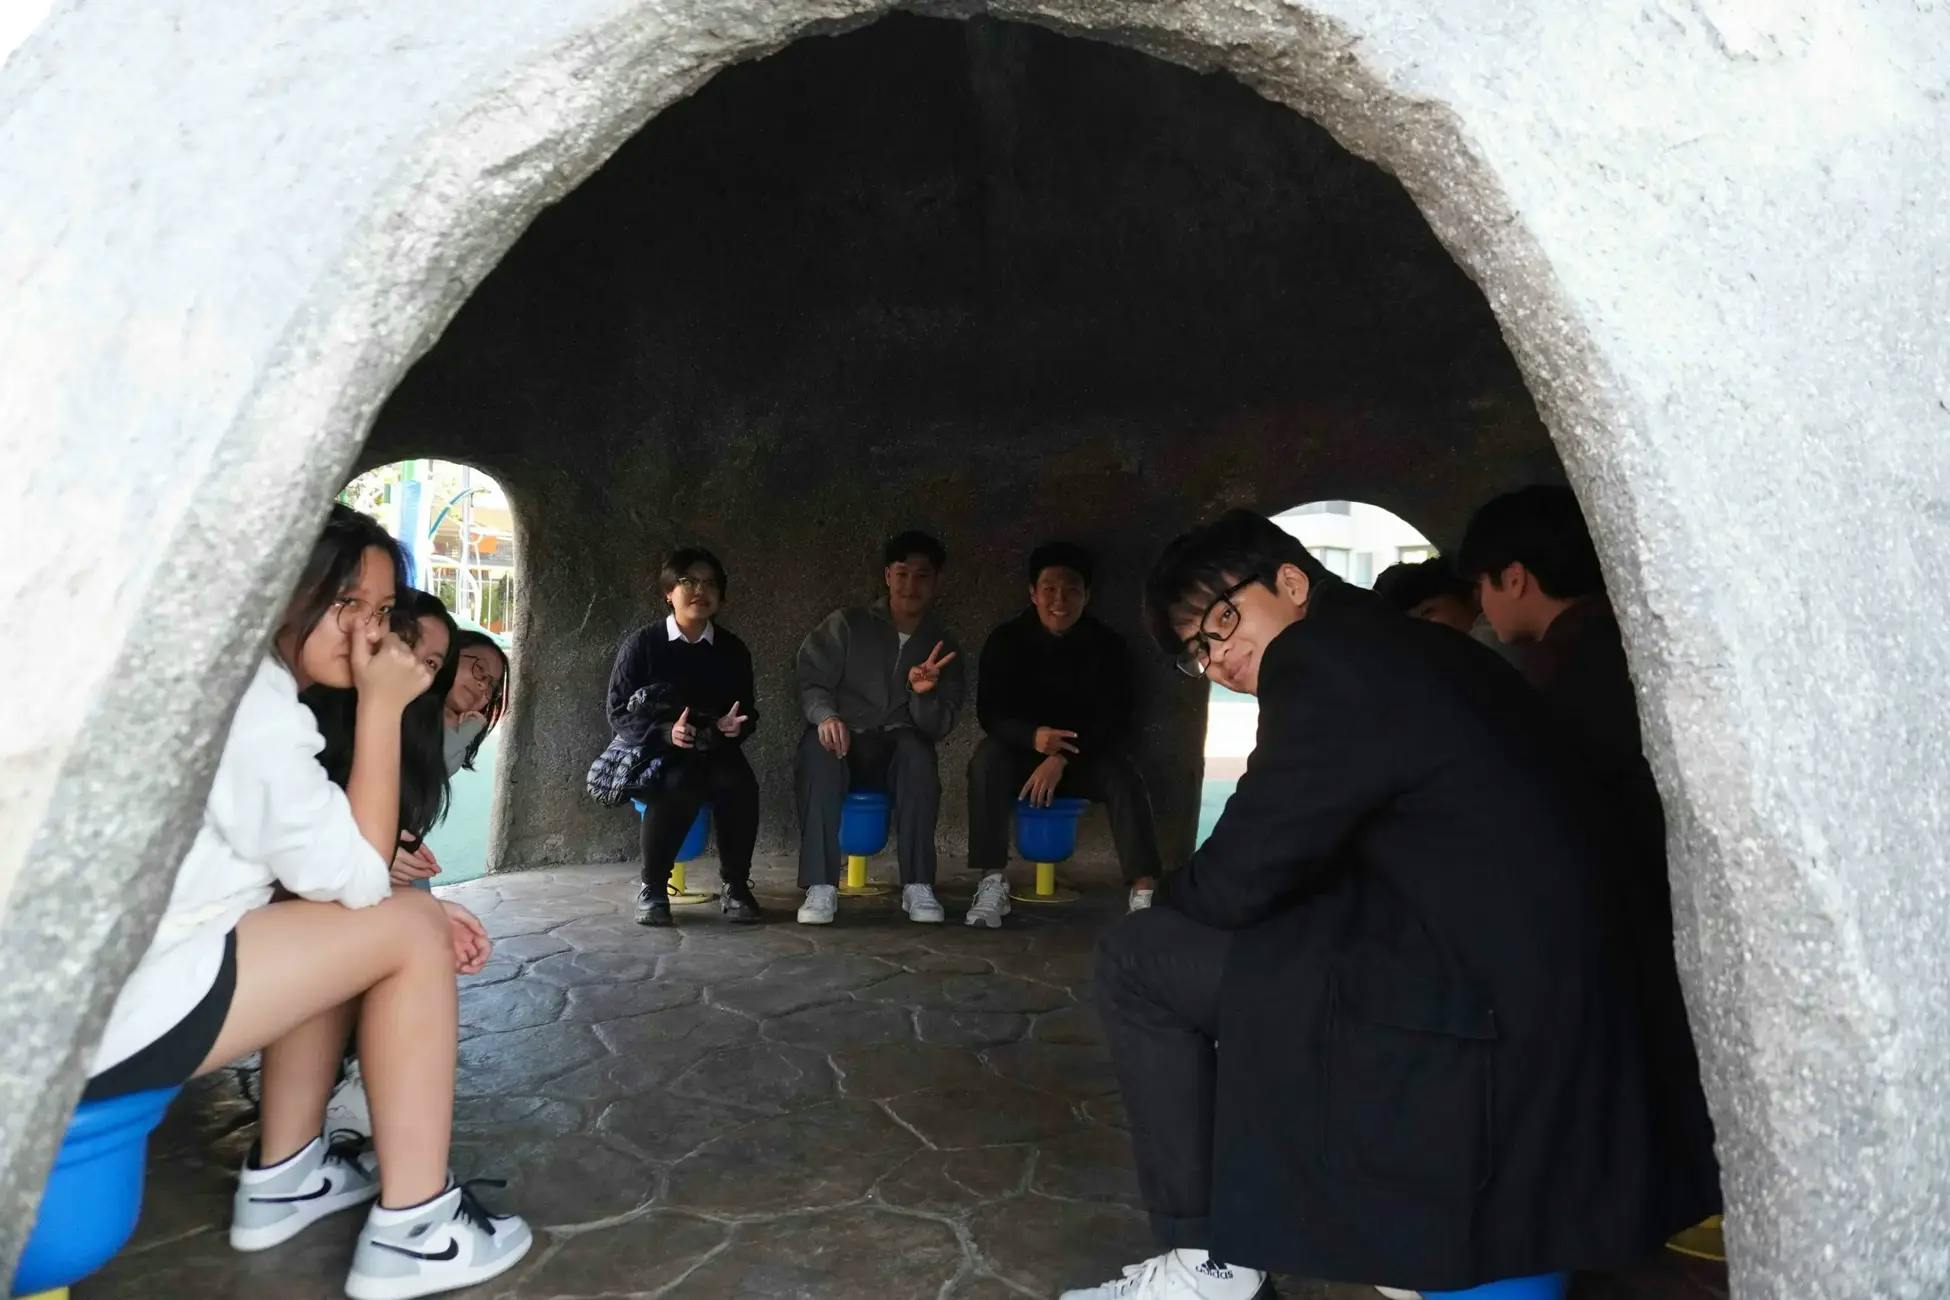 Group photo of a students in a cave at a park